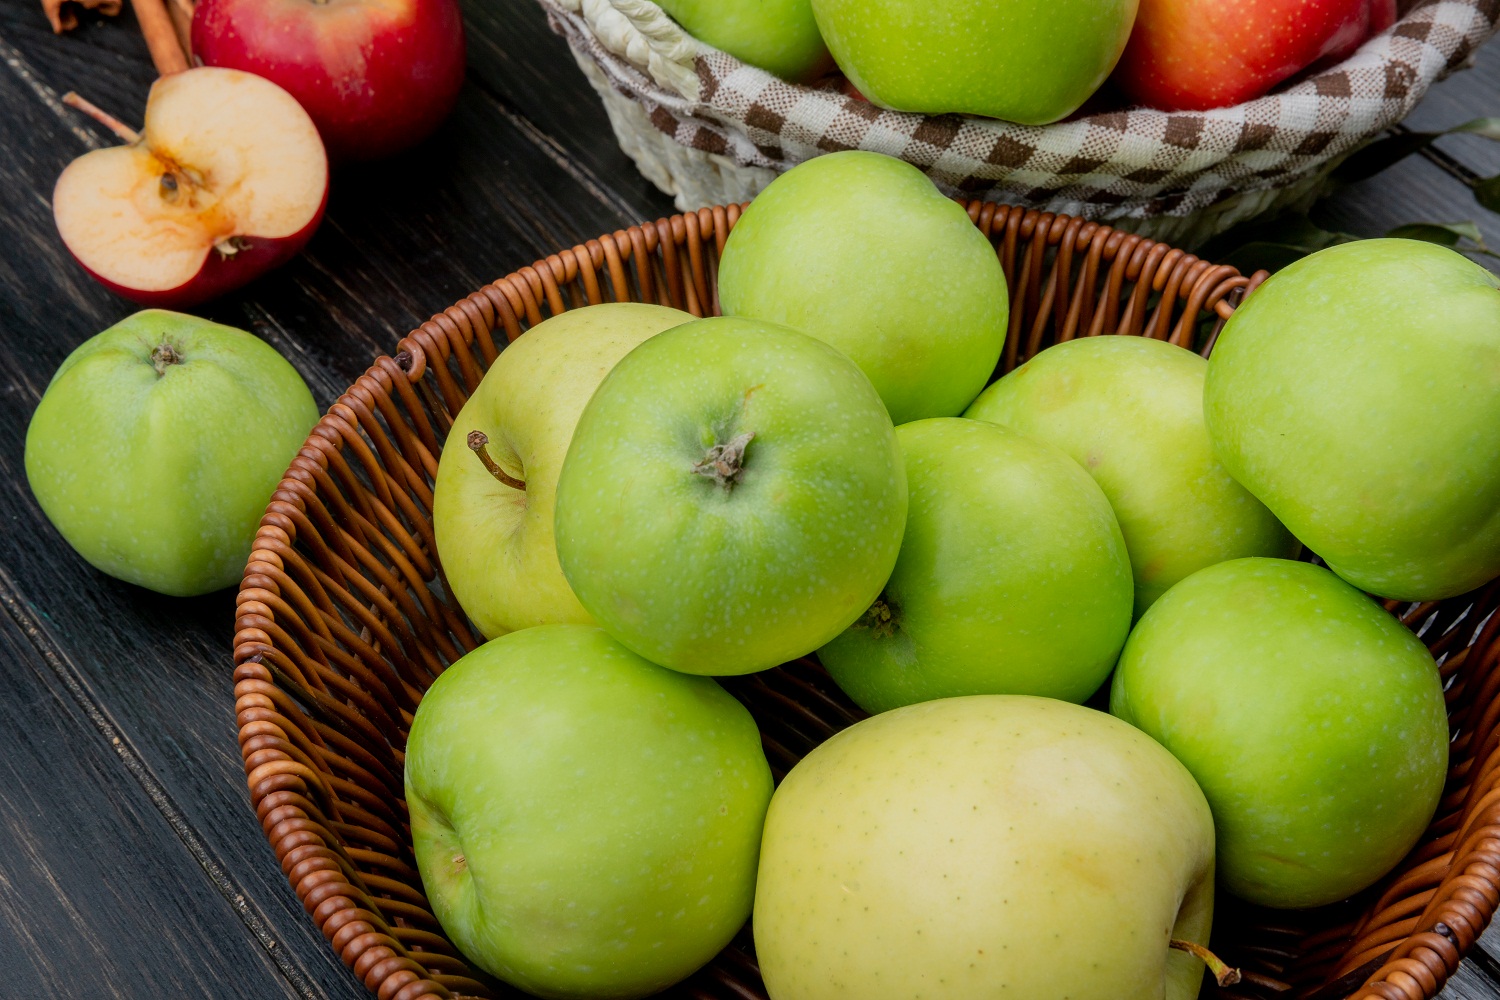 5 Amazing Benefits Of Eating Green Apples